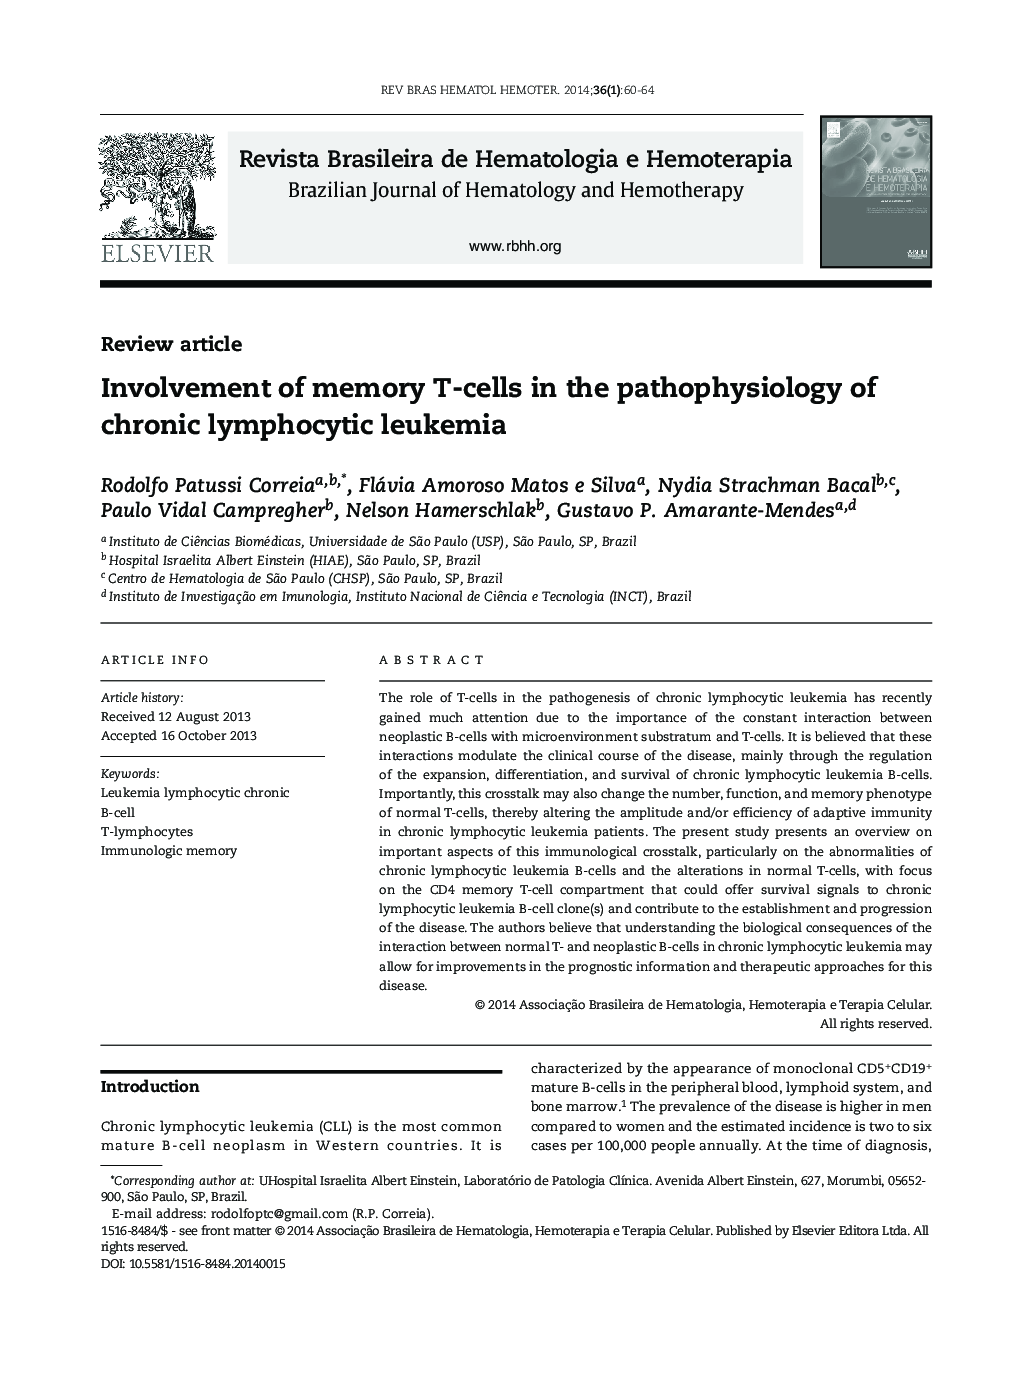 Involvement of memory T-cells in the pathophysiology of chronic lymphocytic leukemia